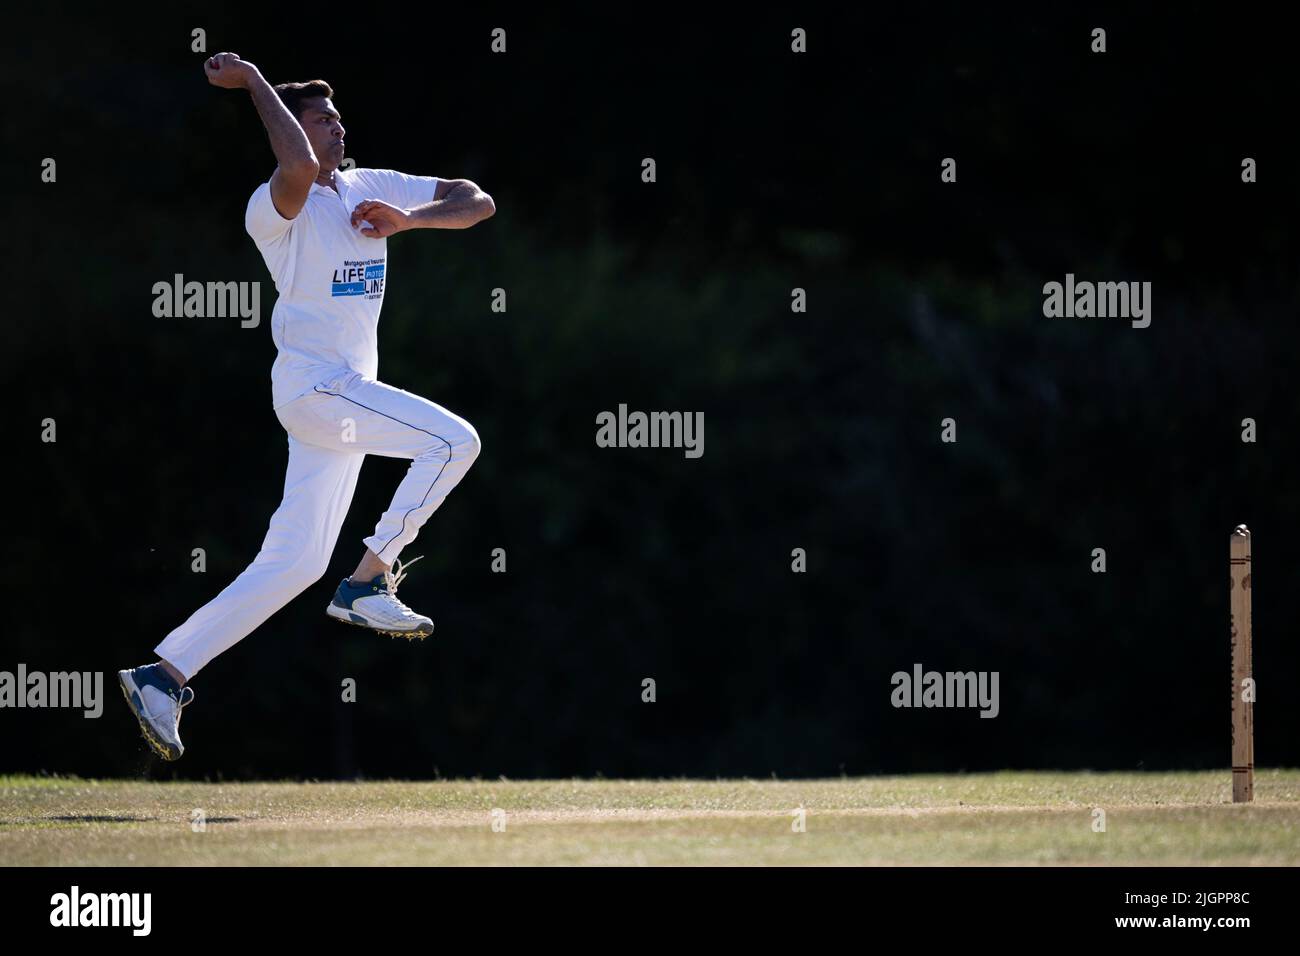 Cricket fast bowler in action Stock Photo